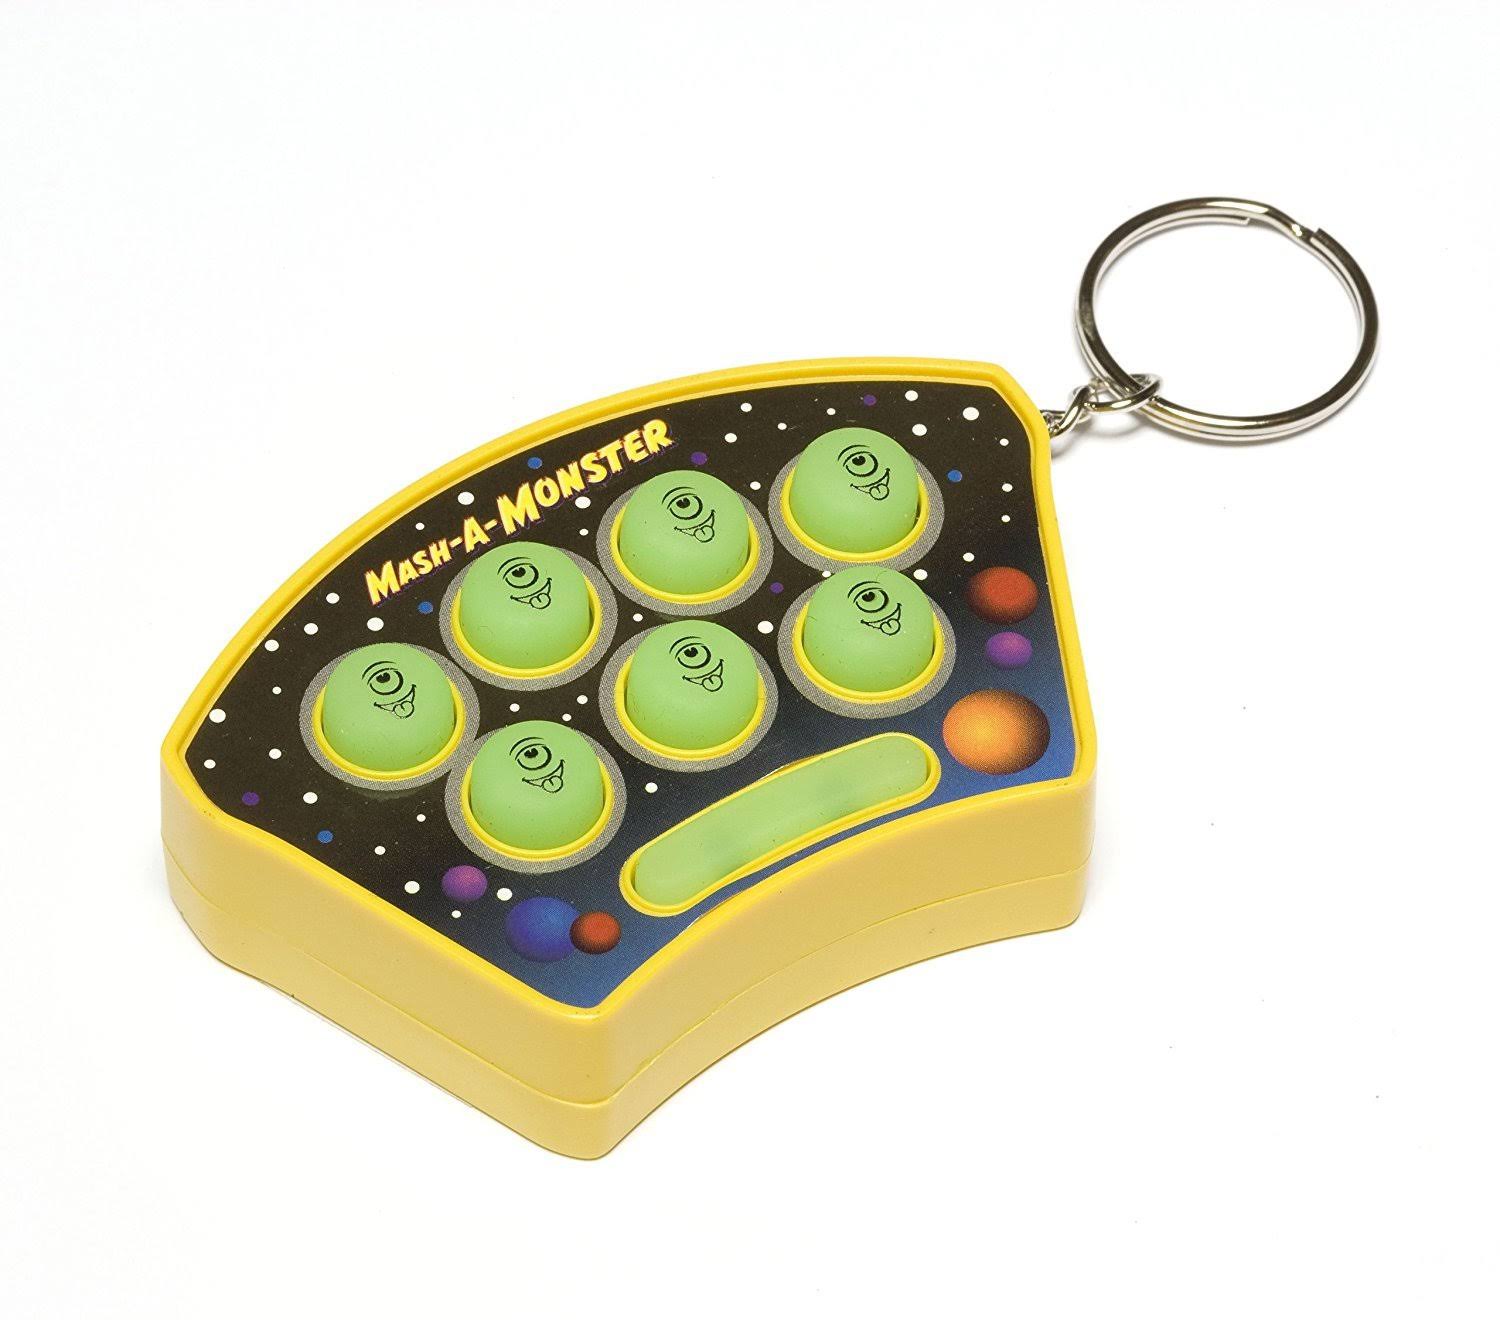 Mash a Monster Electronic Game Funtime Gifts